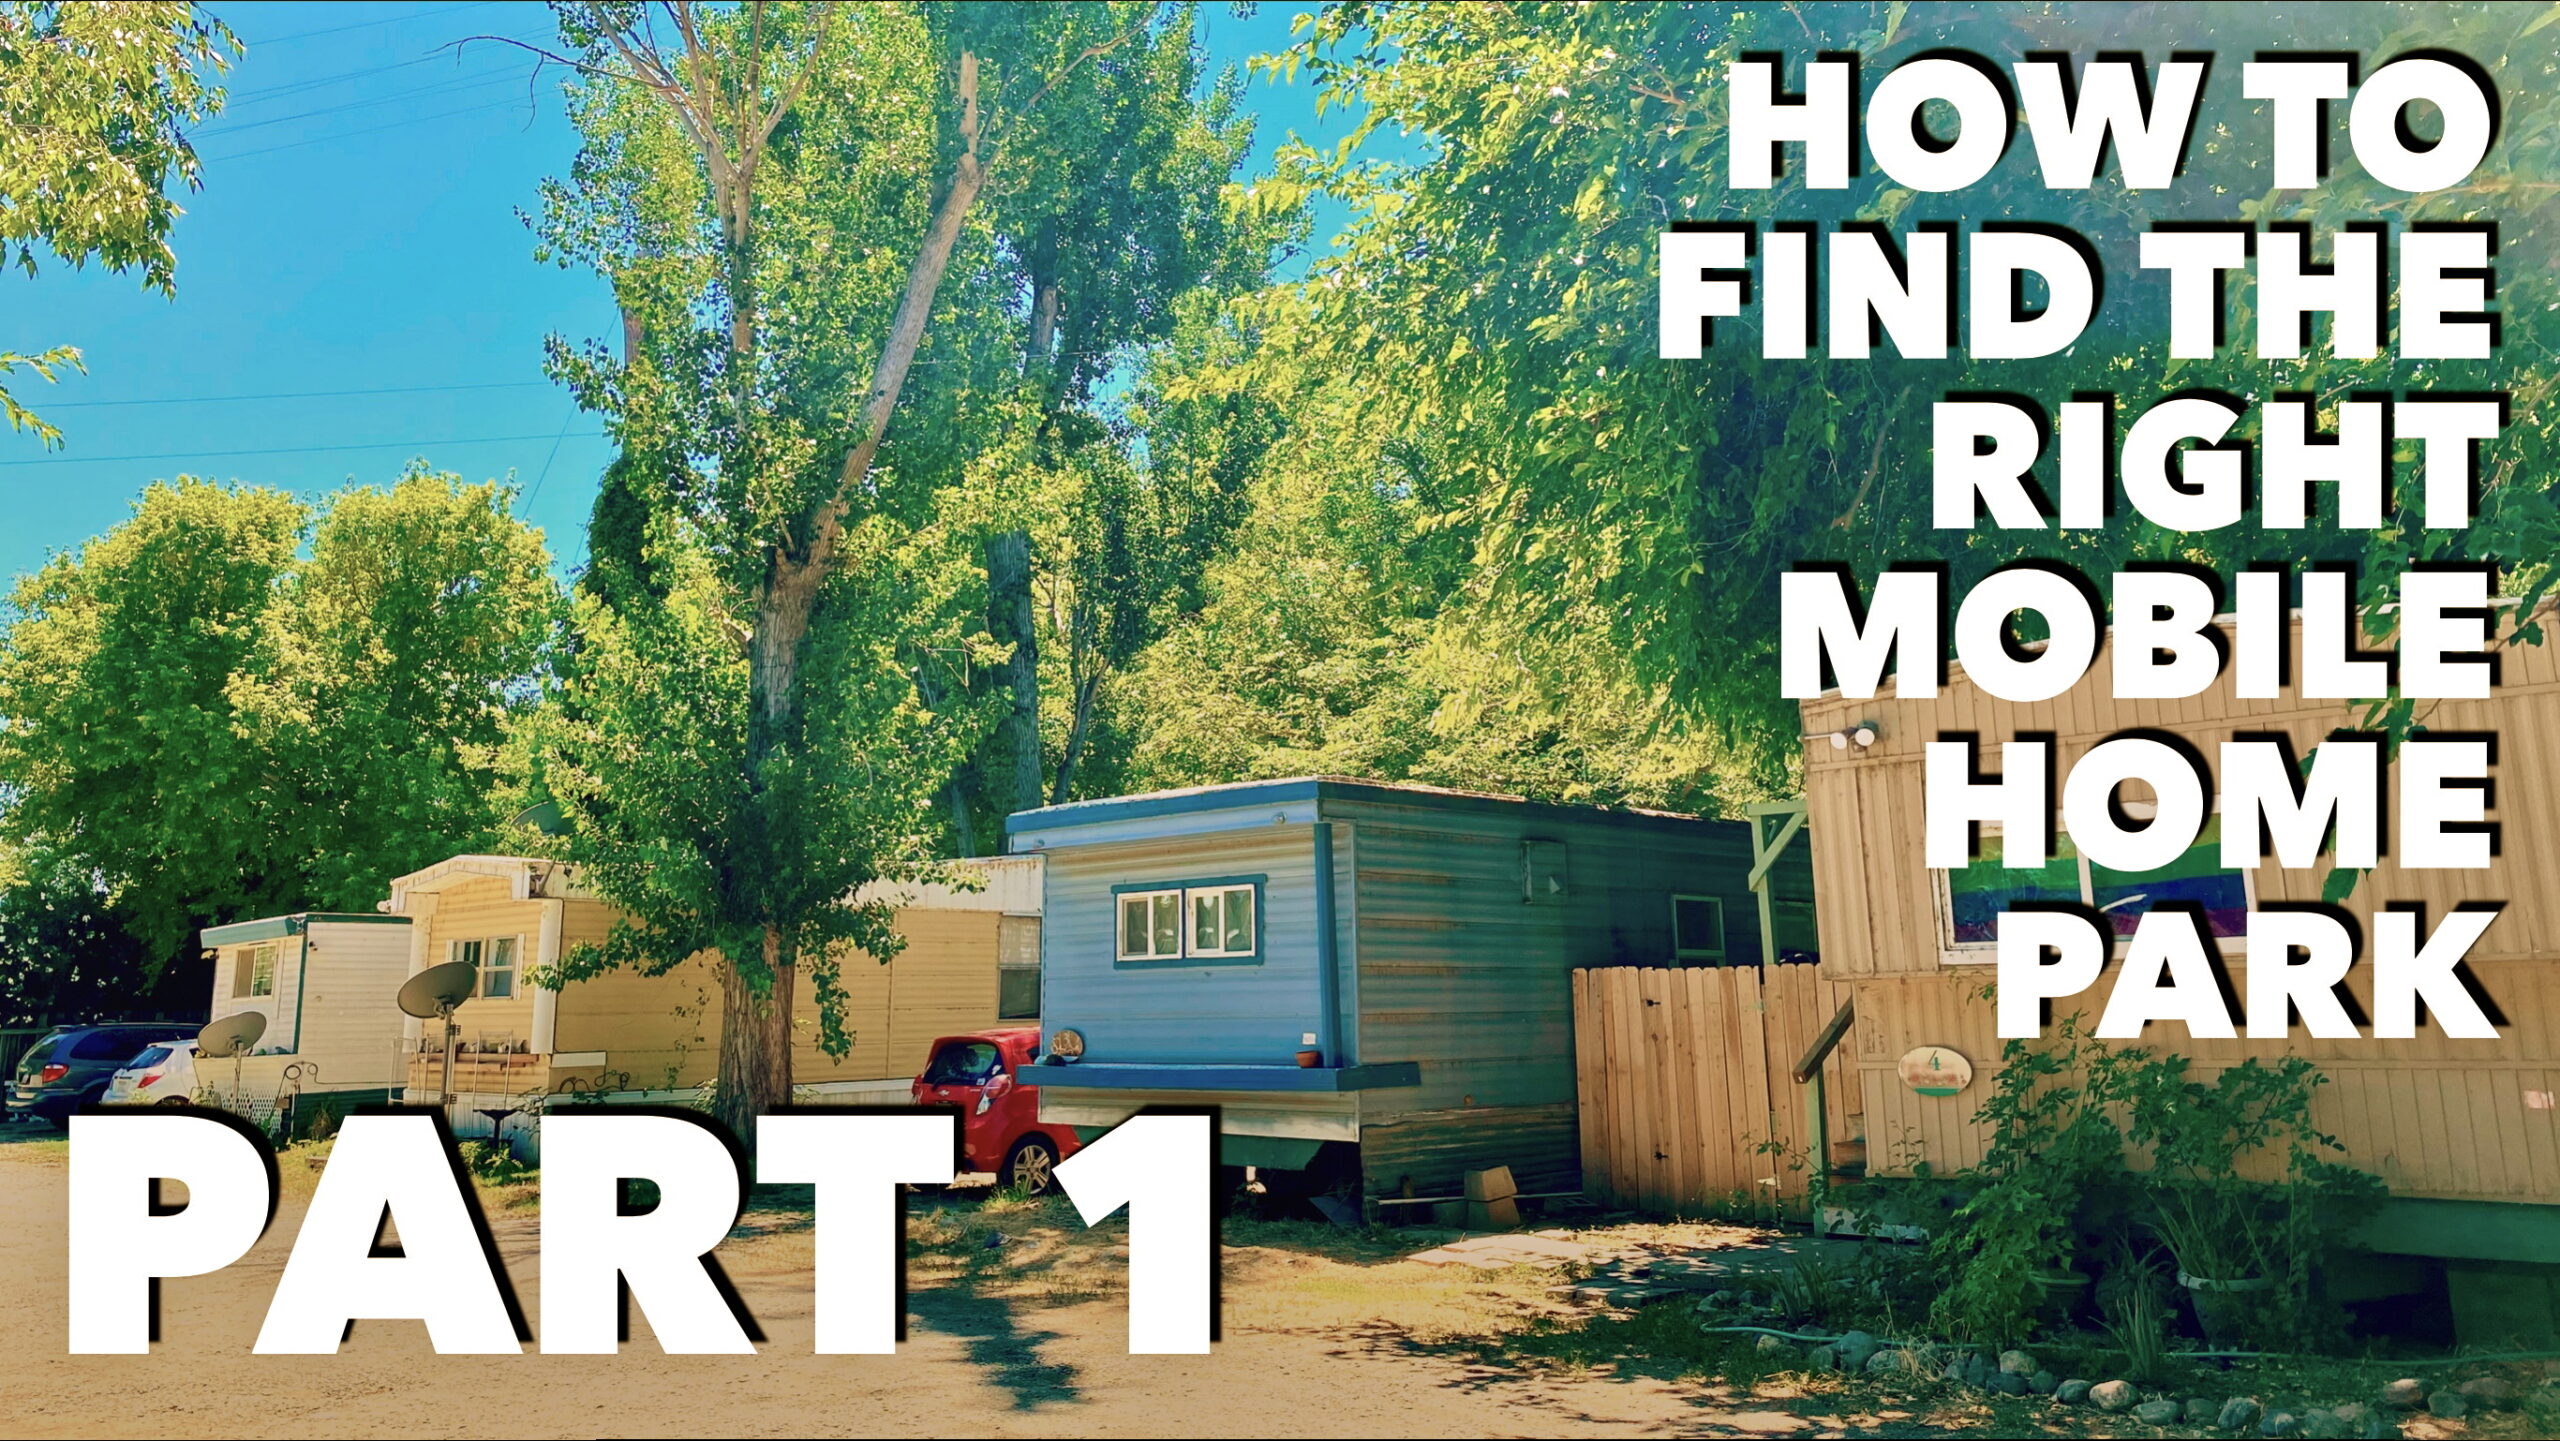 MOBILE HOME PARK INVESTMENTS - Mobile Home Parks For Sale